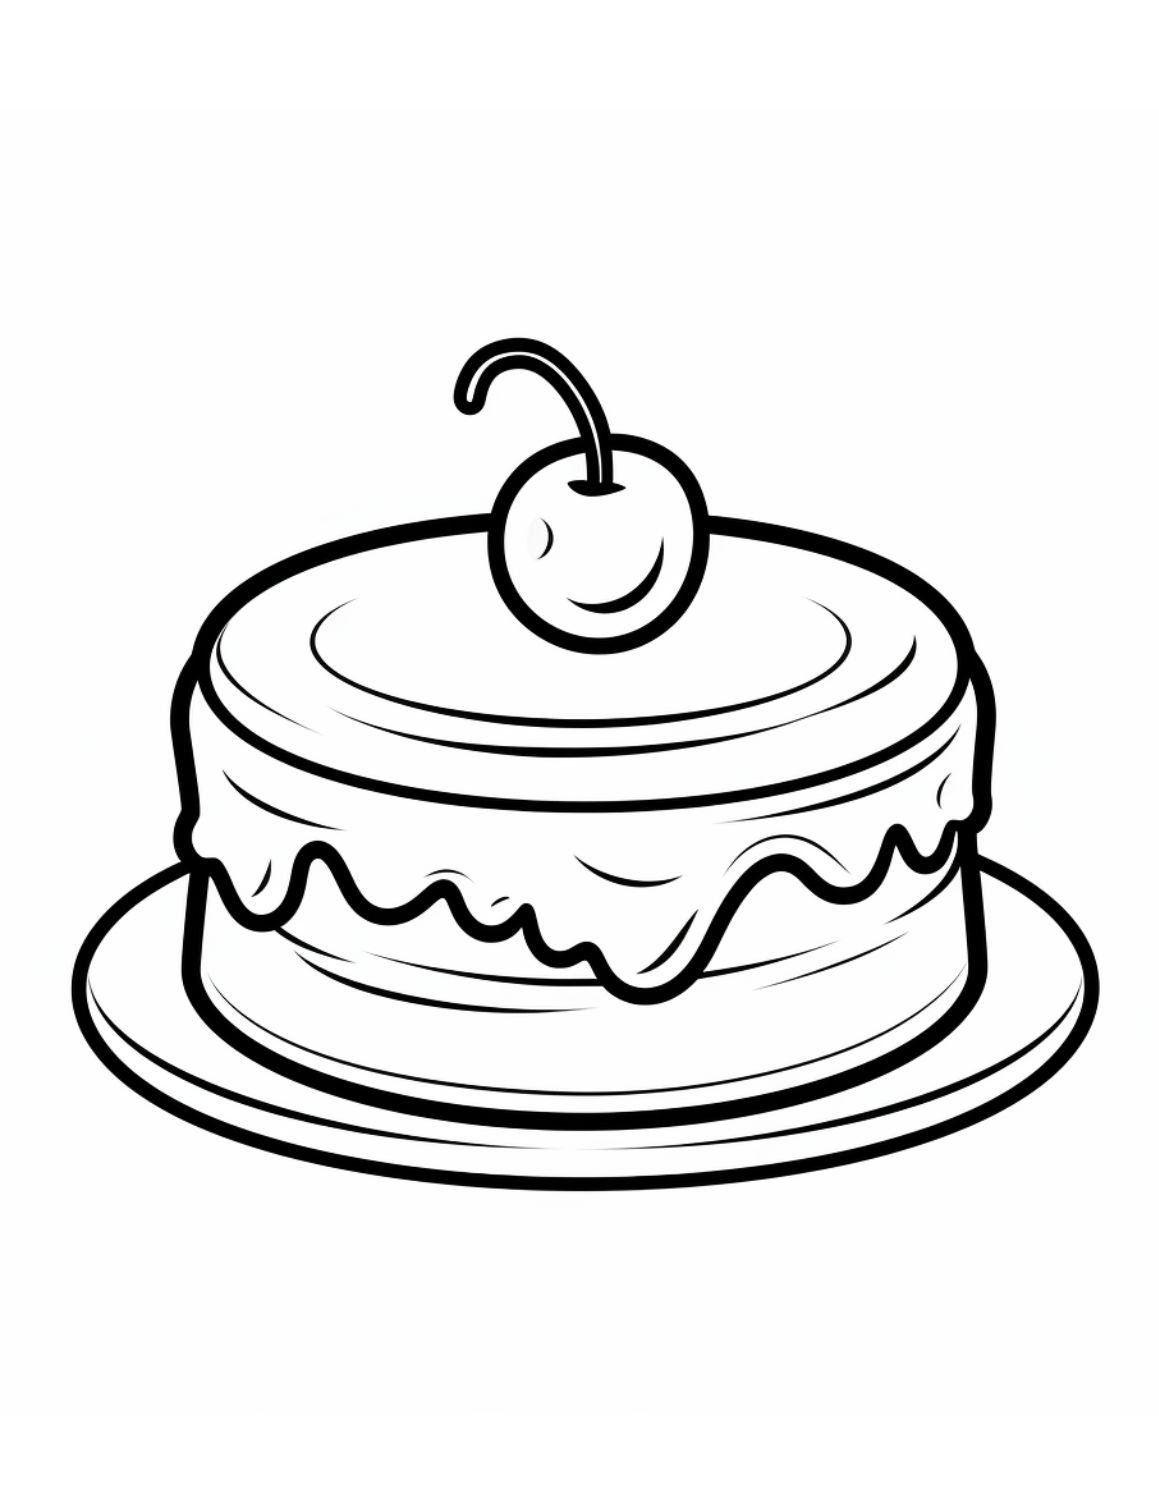 Free printable cake coloring pages for kids and adults skip to my lou